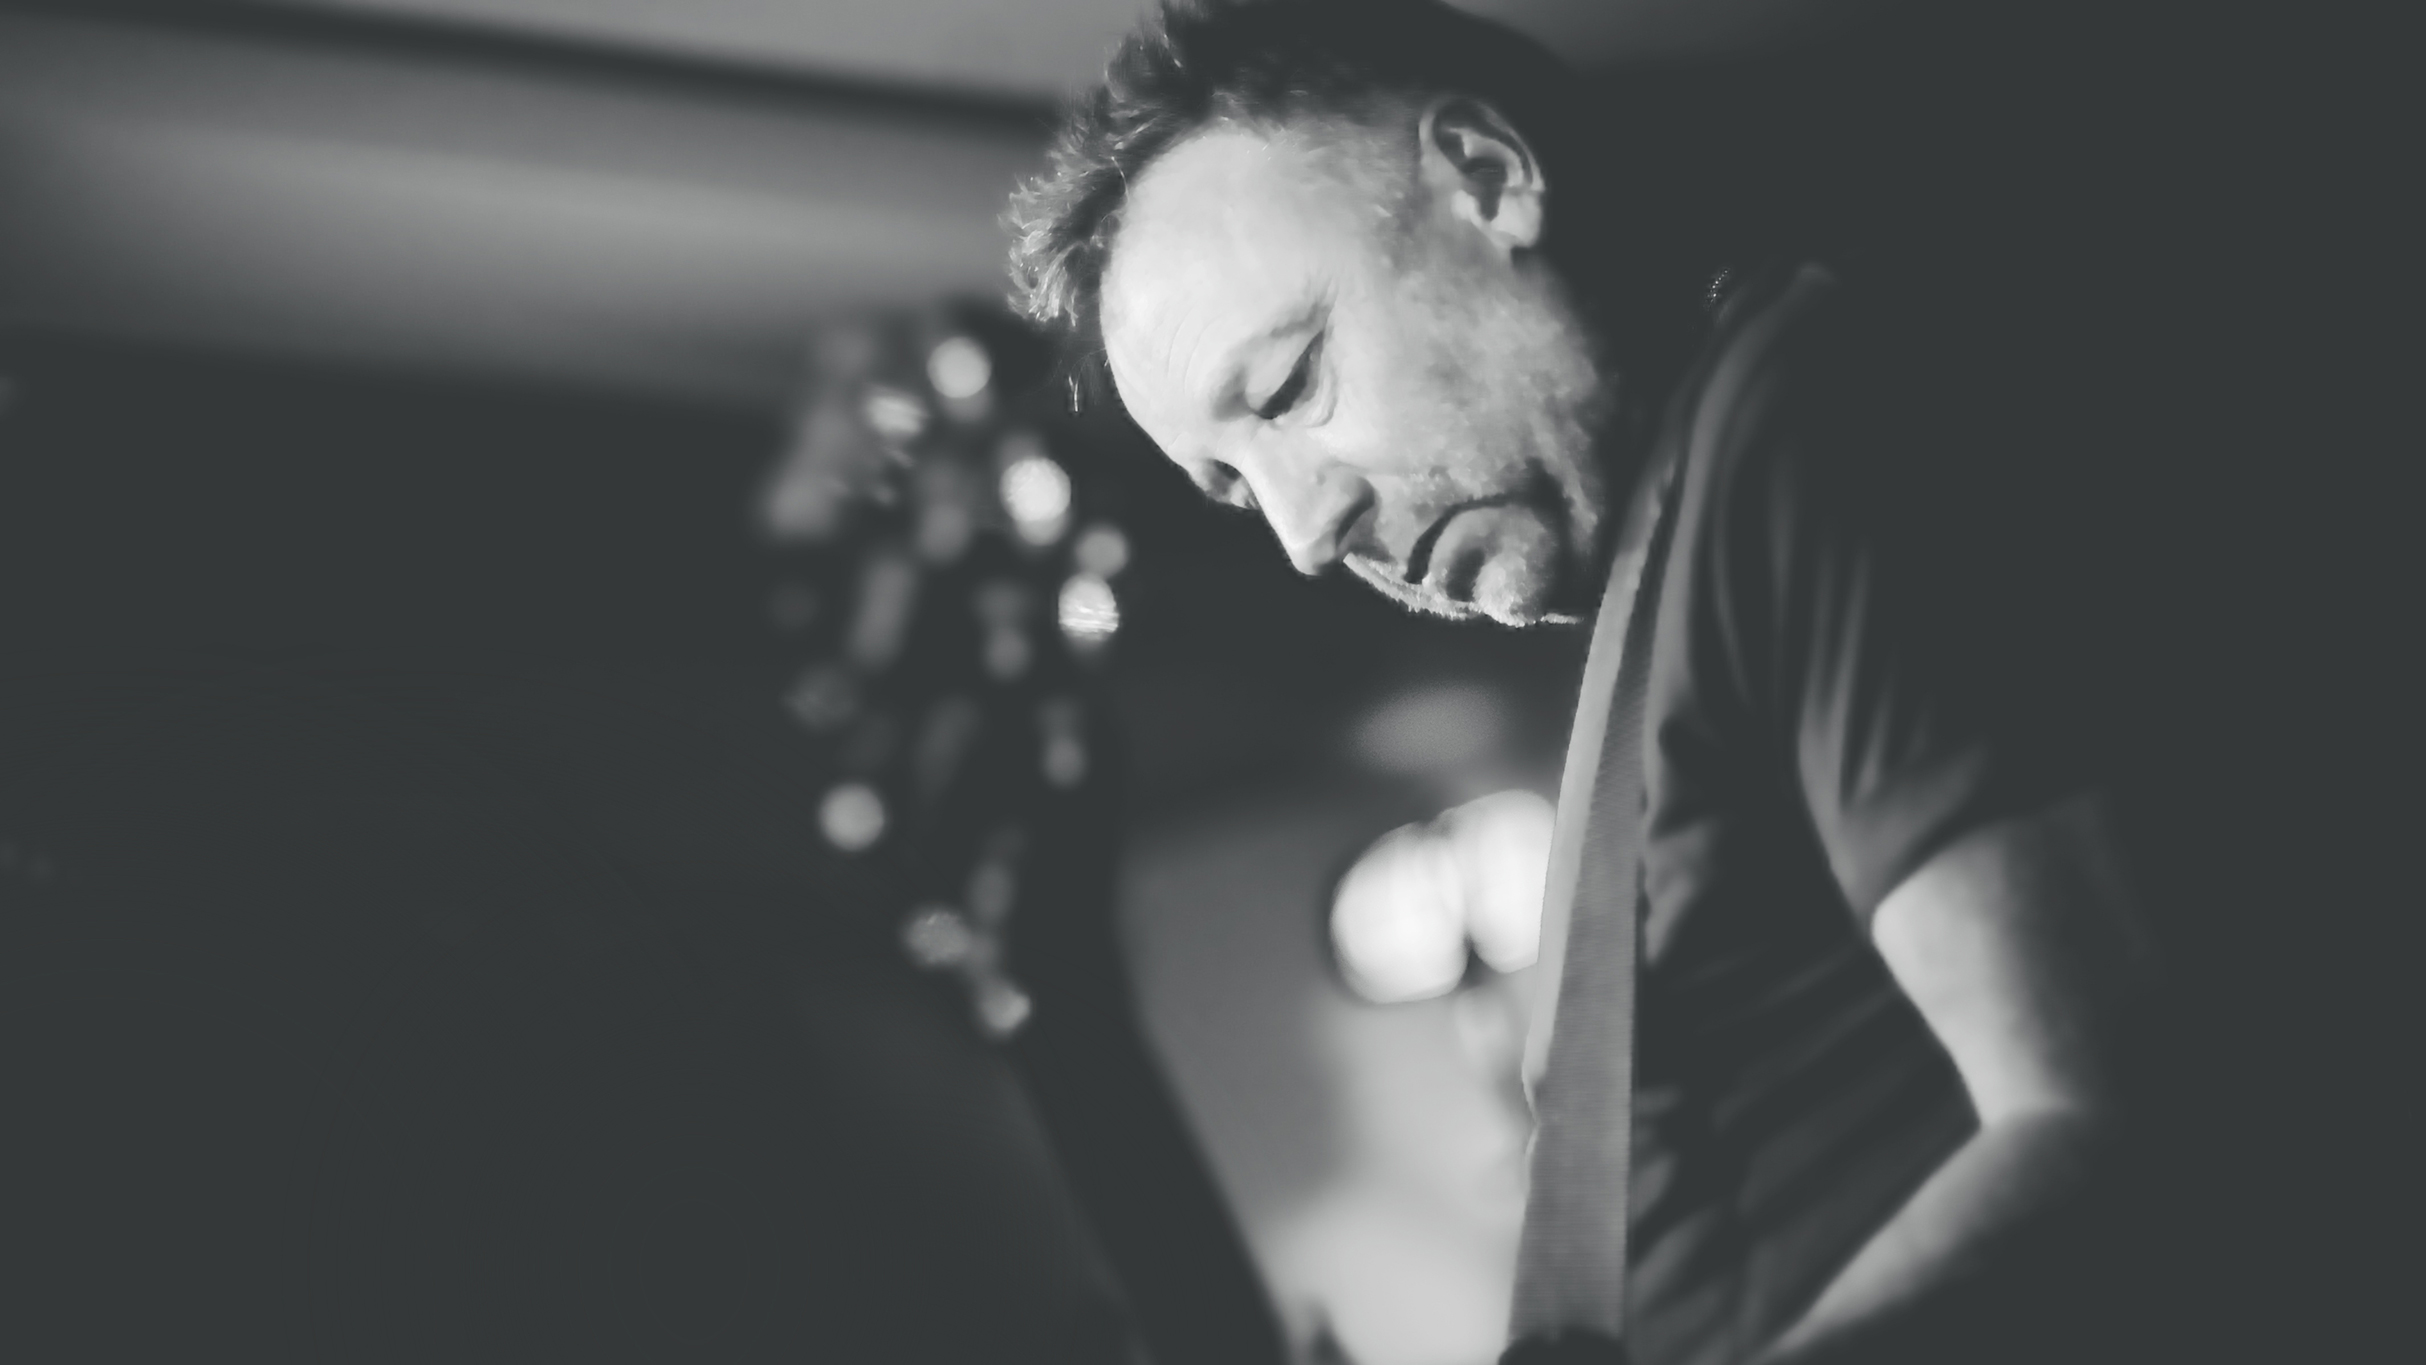 Peter Hook & the Light Performing Both 'substance' Albums